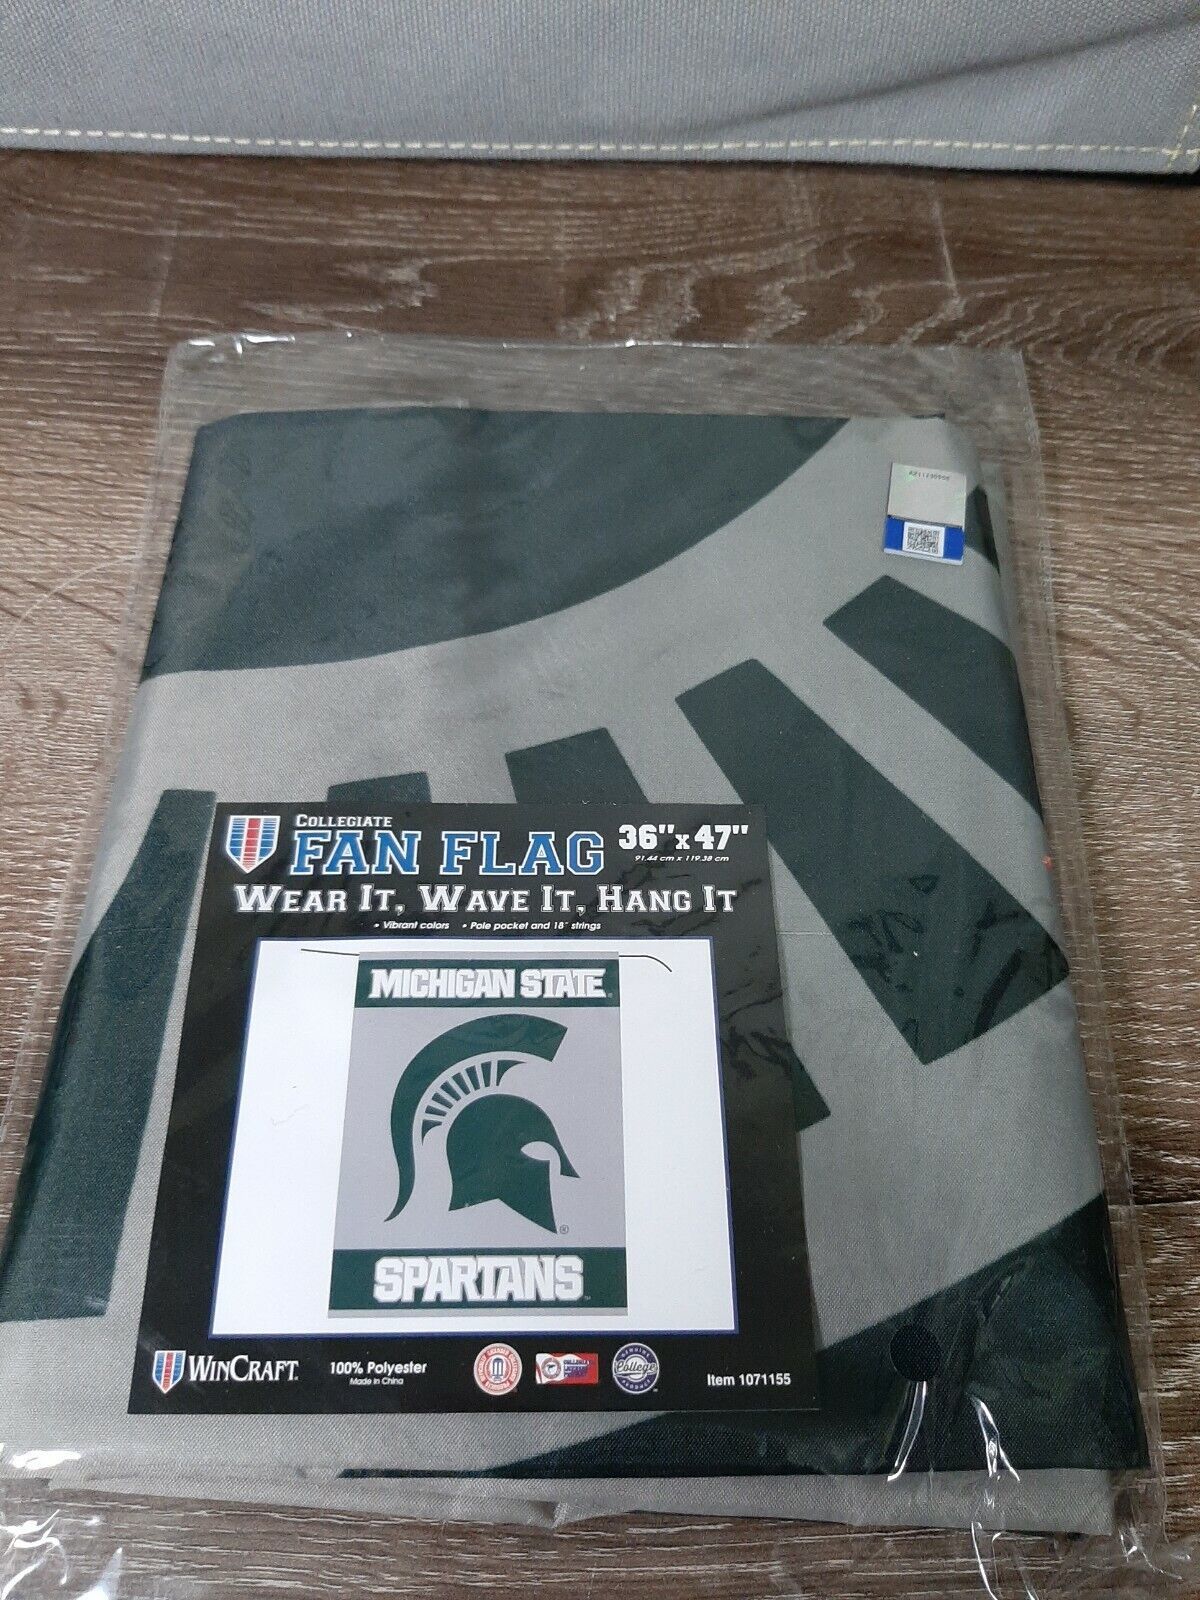 Primary image for Michigan State University Fan Flag Spartan Banner Spartans Sparty MSU 36"x 47"